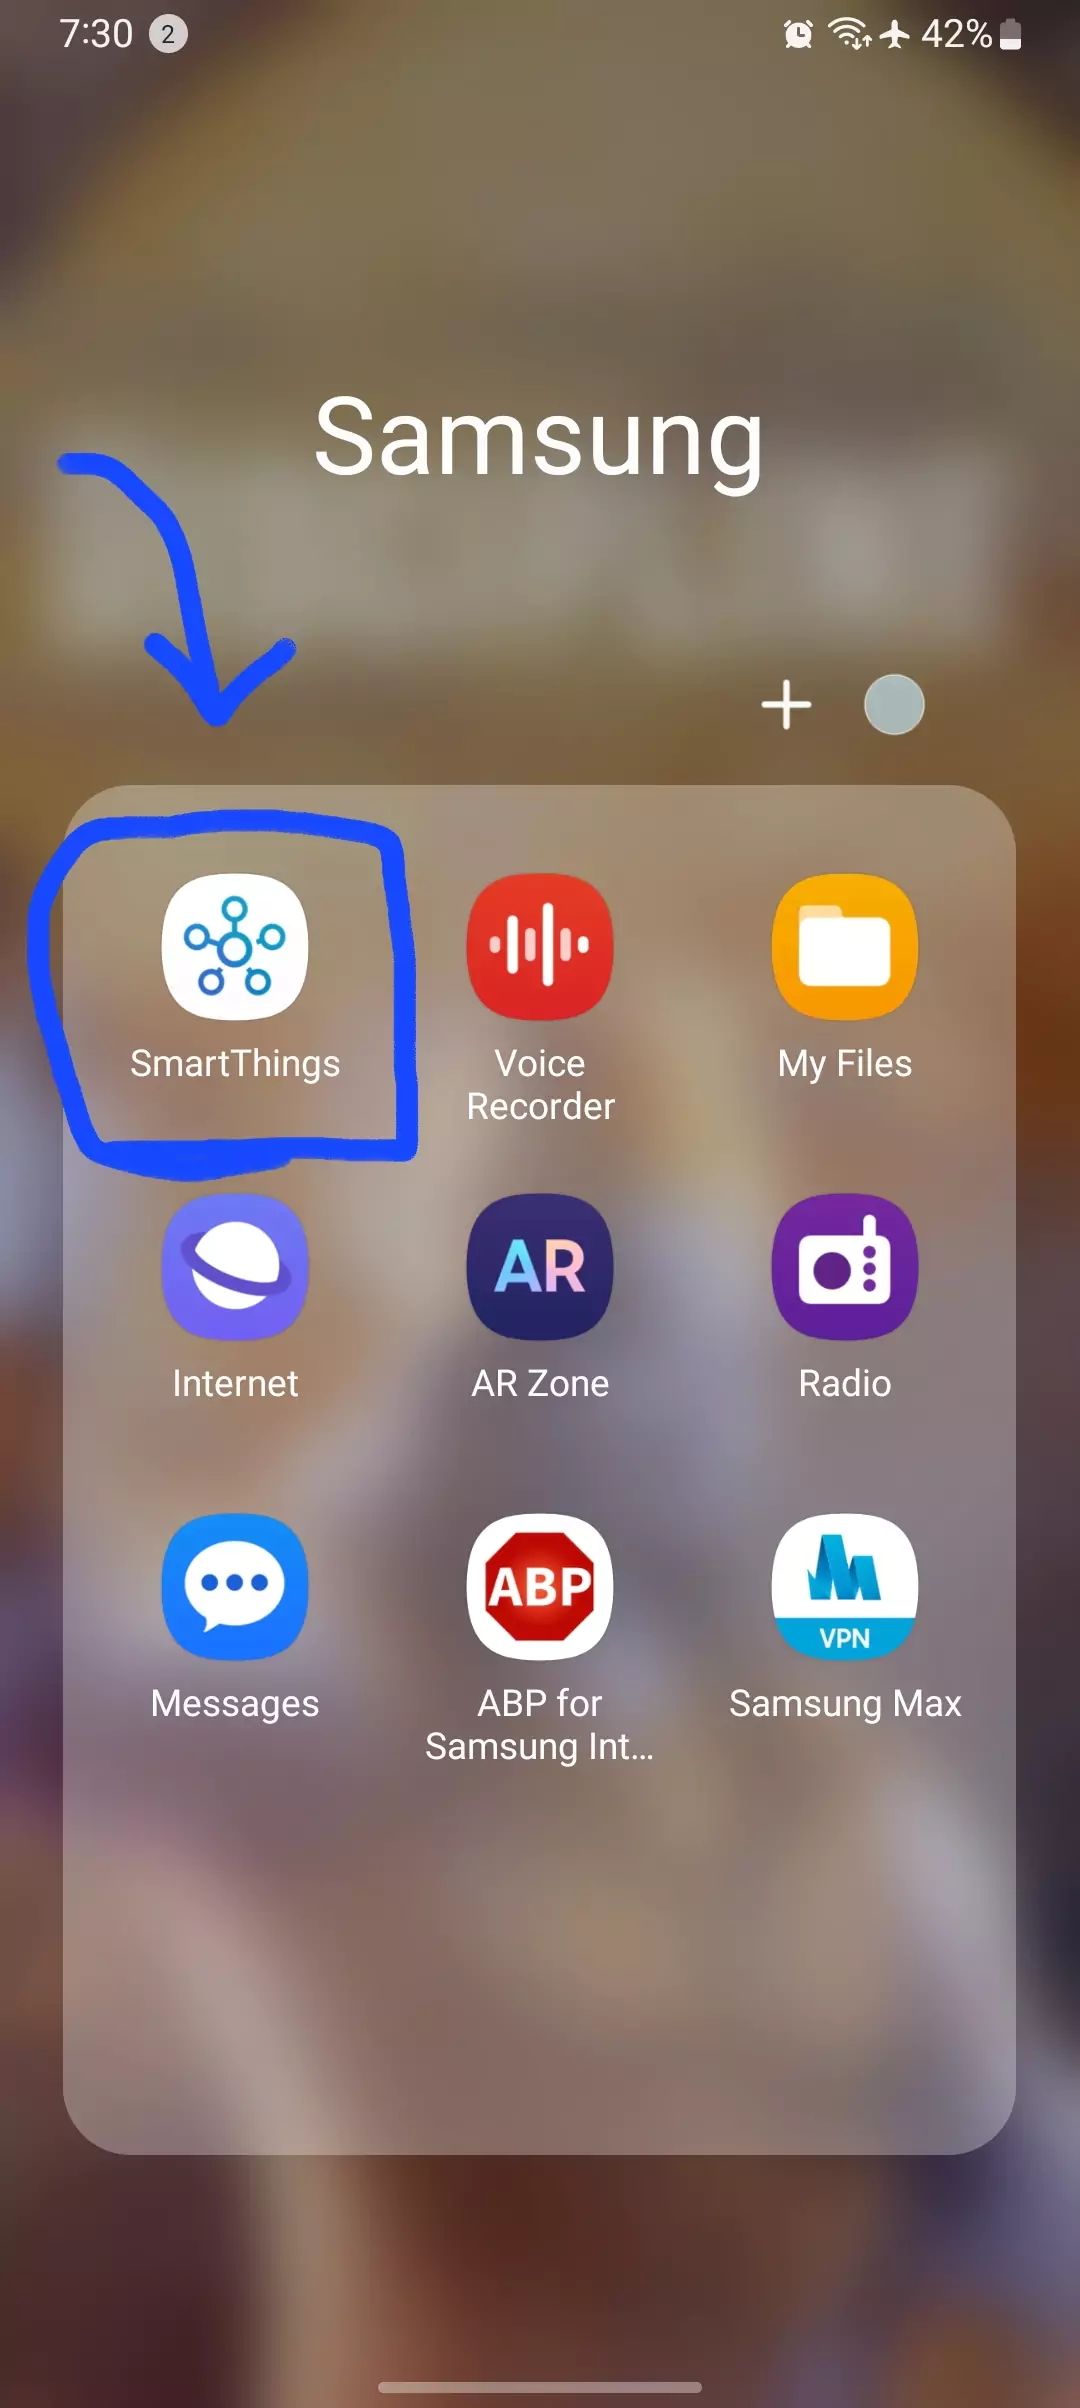 smartthings app highlighted